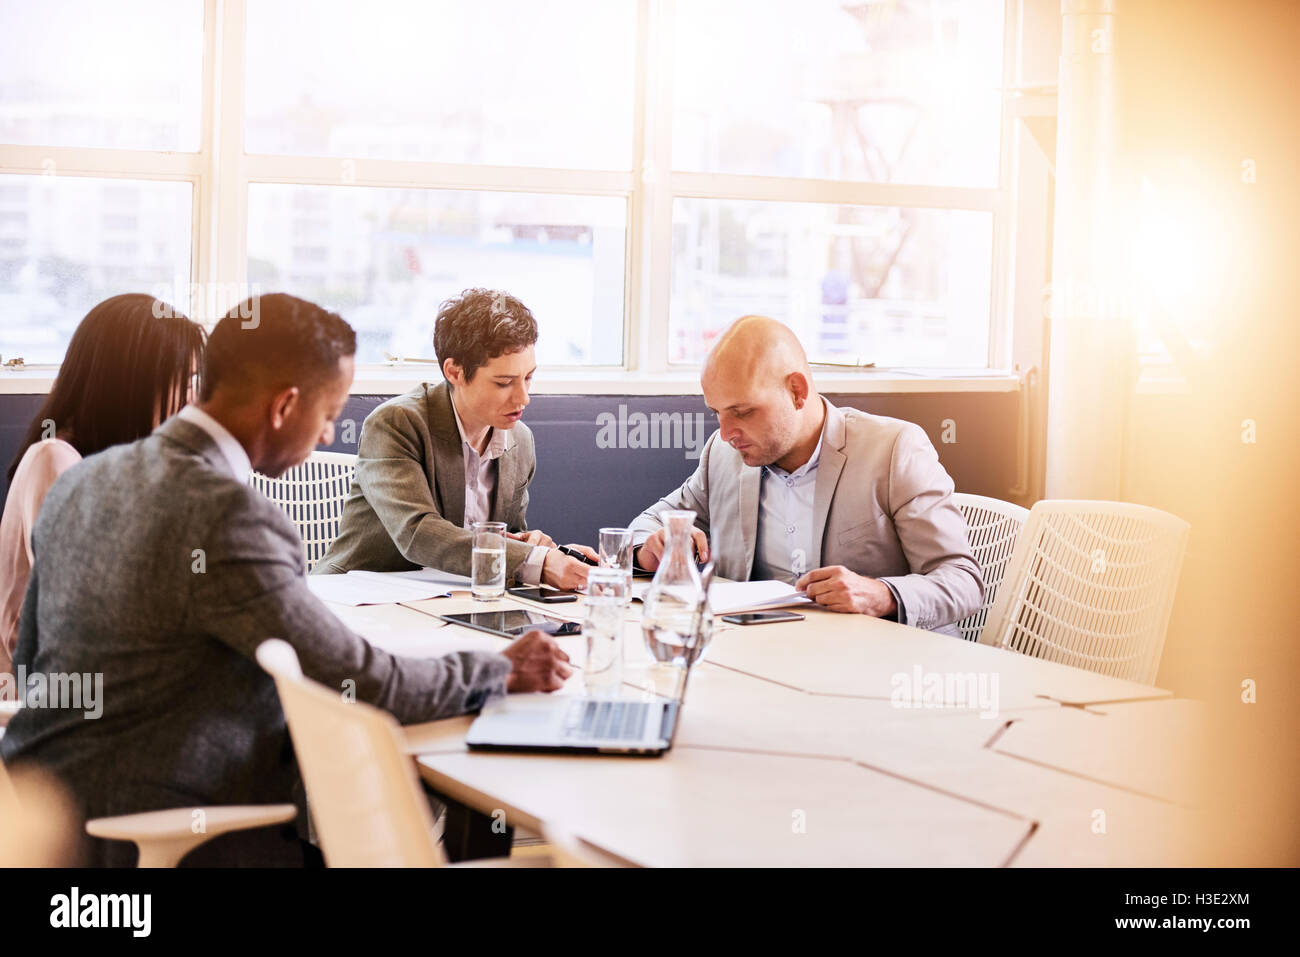 Business meeting between four professional executives in conference room Stock Photo